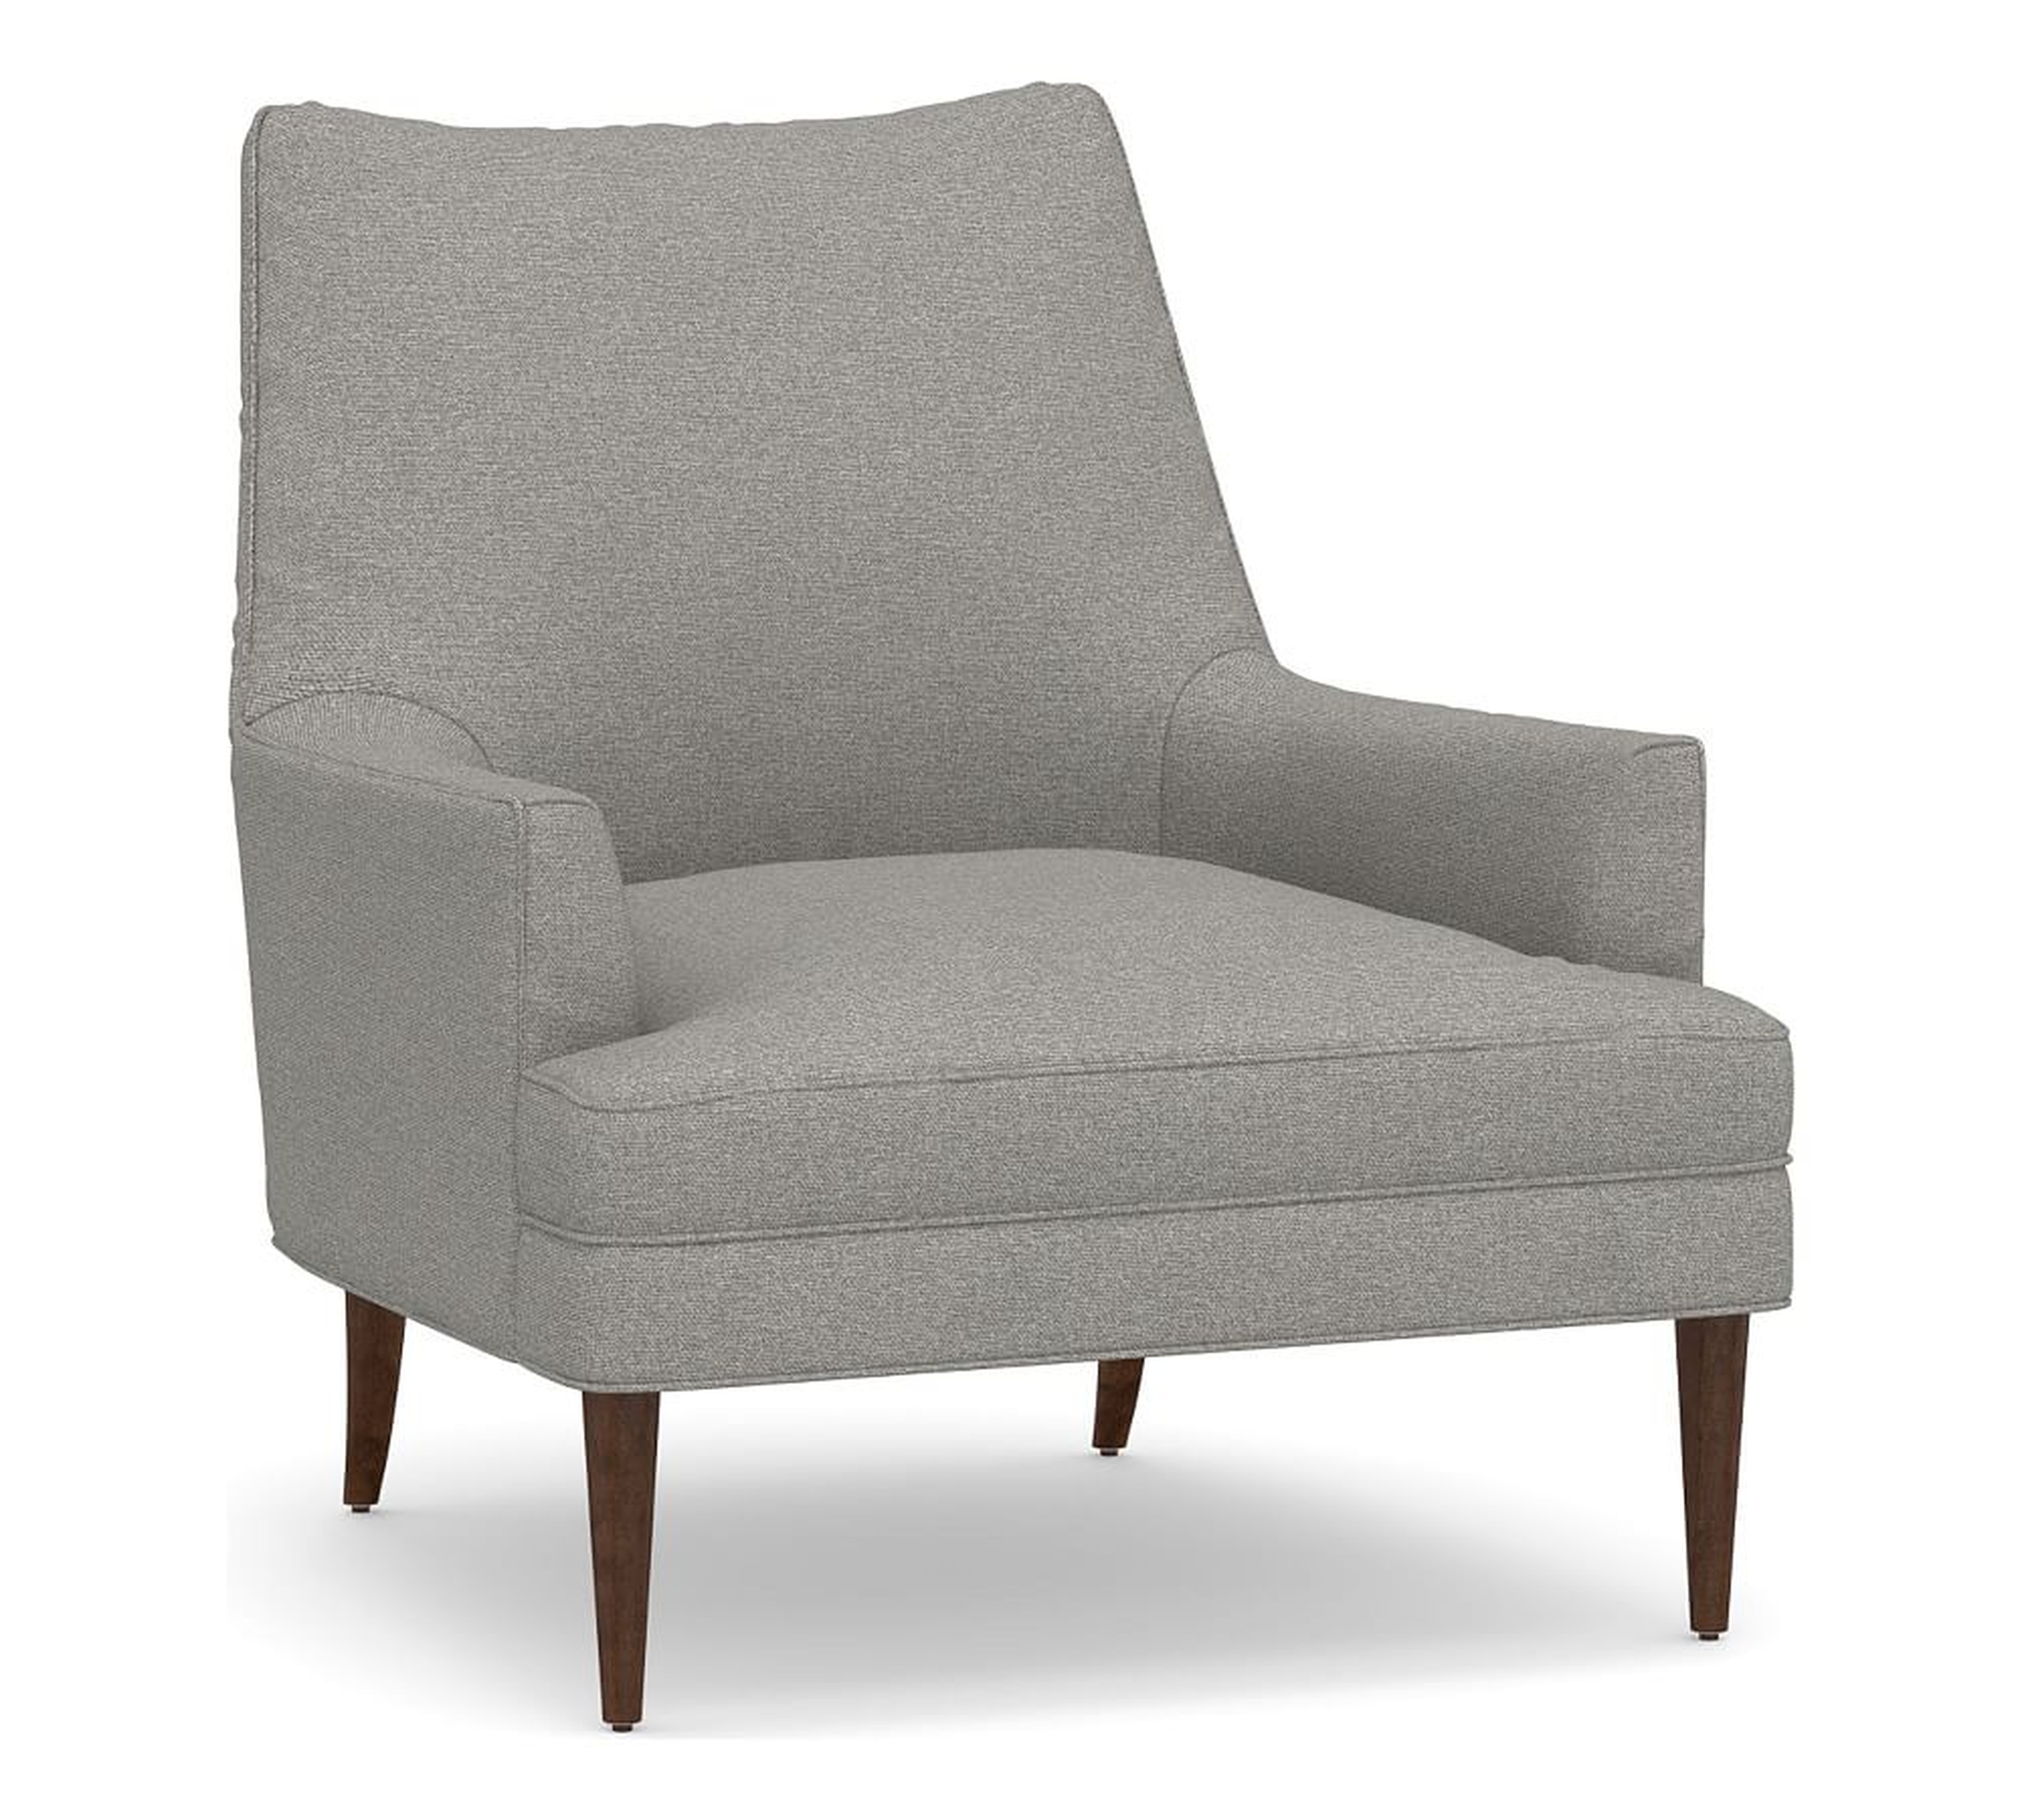 Reyes Upholstered Armchair, Polyester Wrapped Cushions, Performance Heathered Basketweave Platinum - Pottery Barn